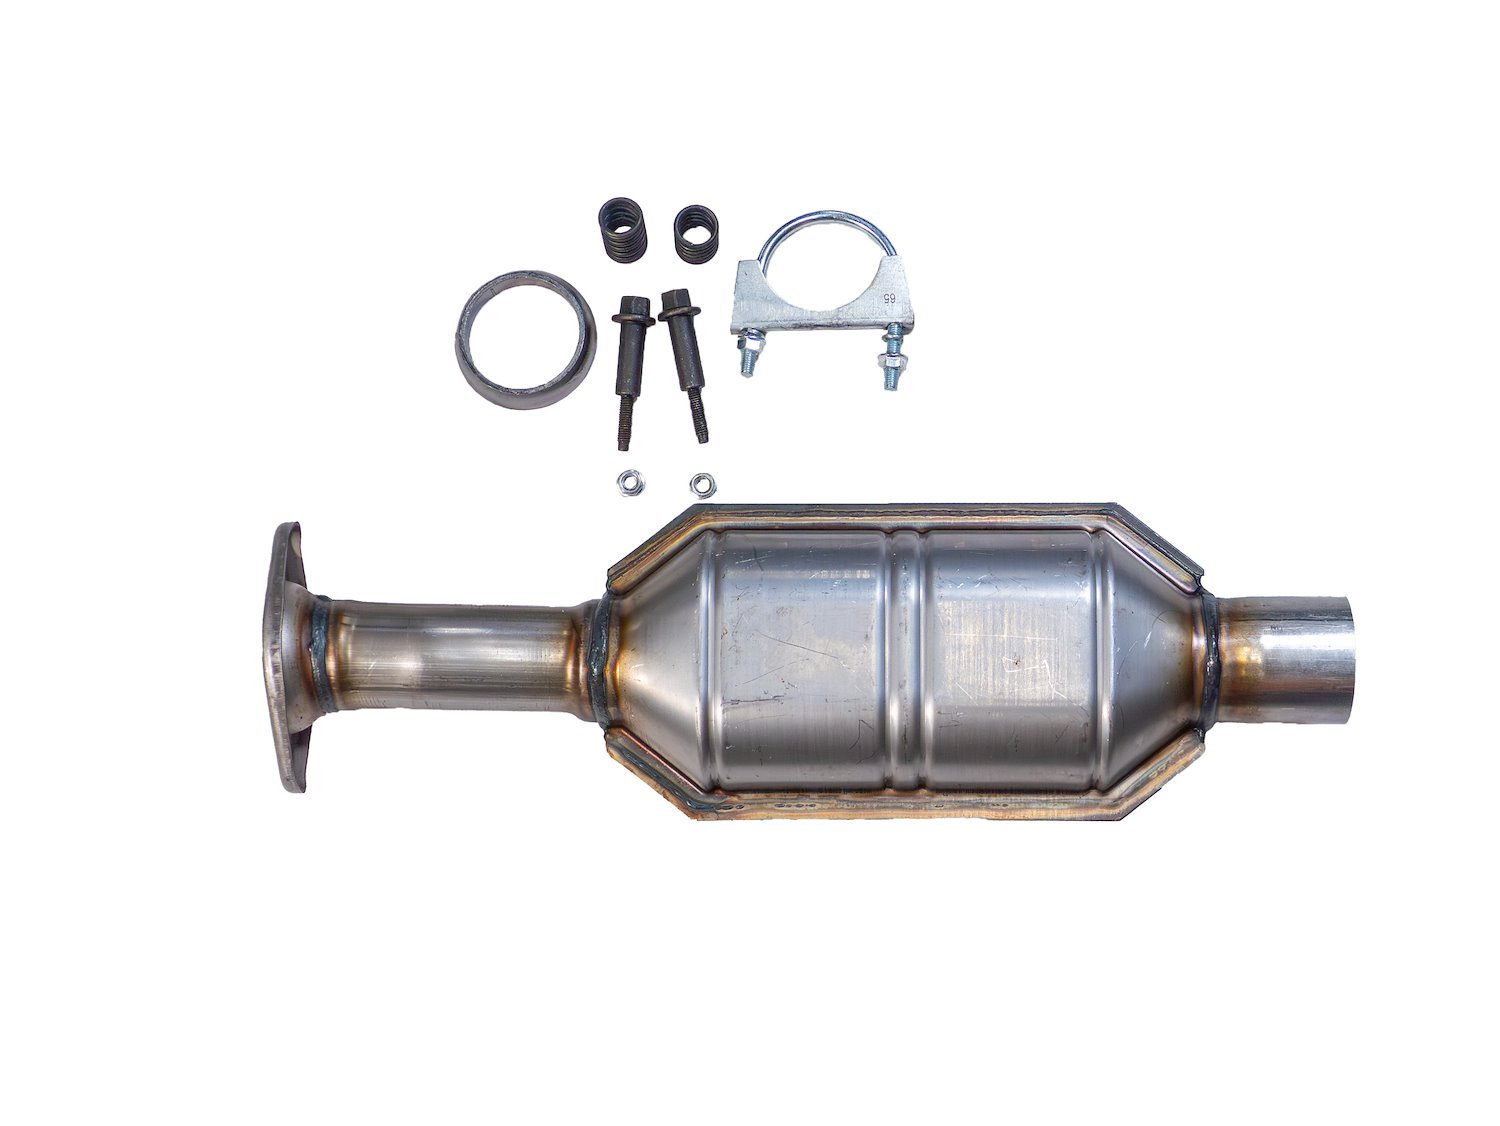 Catalytic Converter for 2009-2012 Ford Escape, 2009-2011 Mazda Tribute, Mercury Mariner w/2.5L 4 cyl. Eng. [Center]